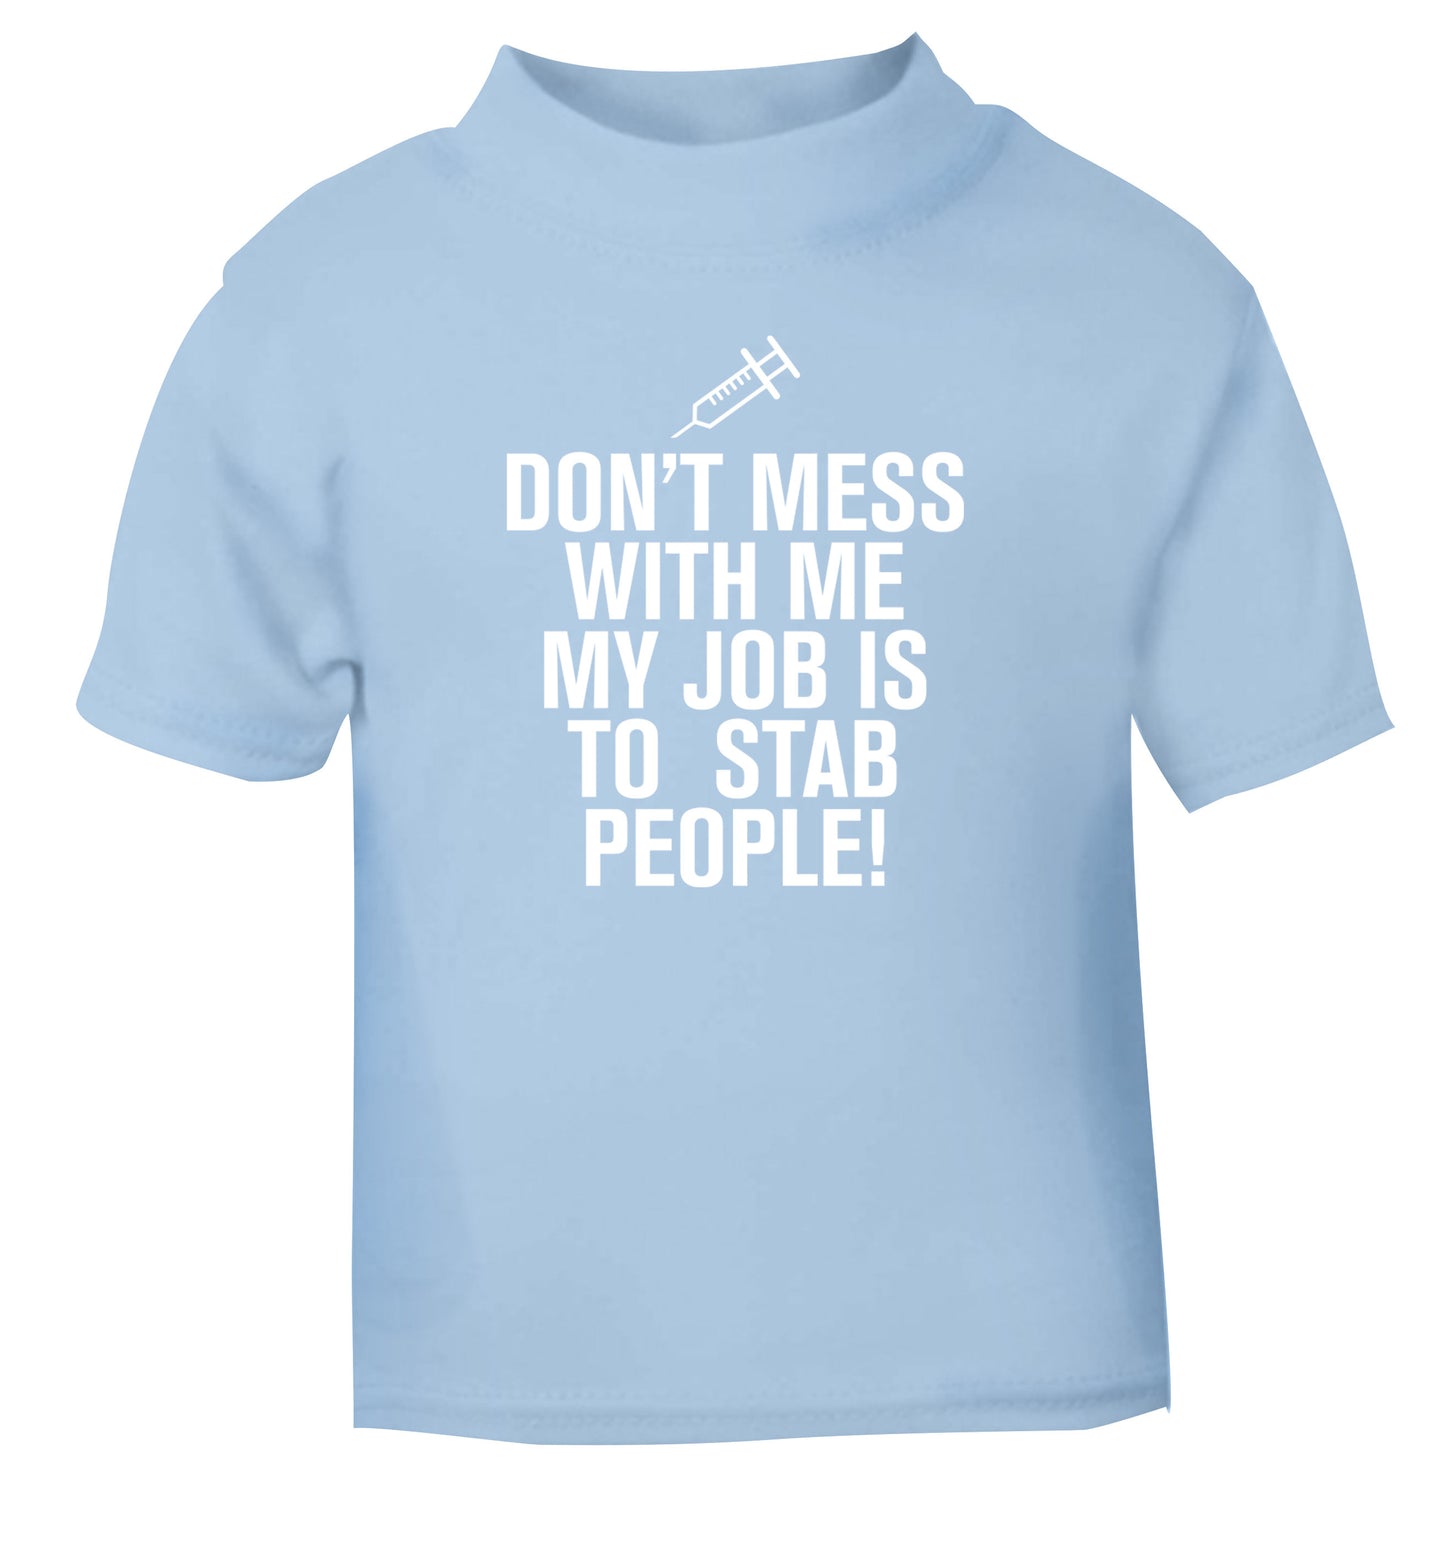 Don't mess with me my job is to stab people! light blue Baby Toddler Tshirt 2 Years